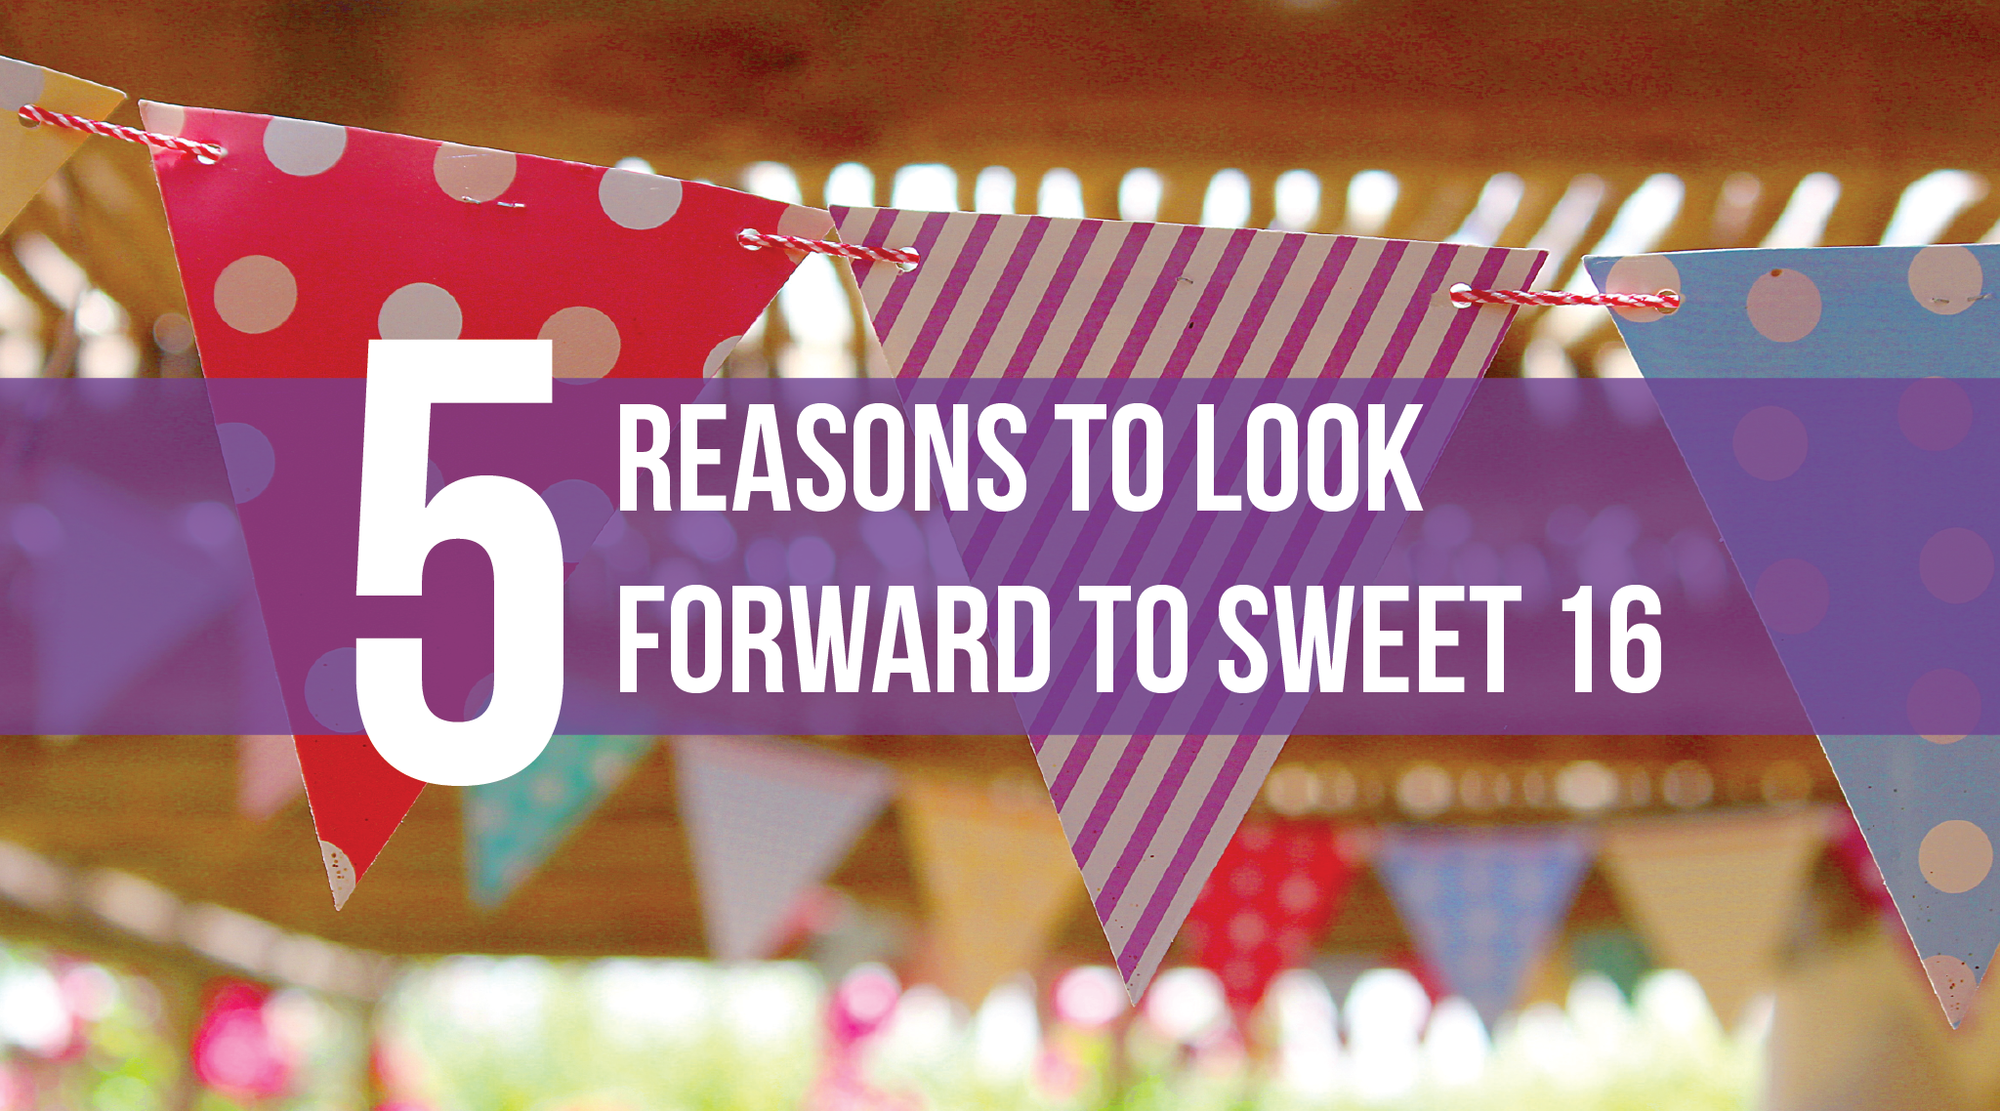 5 Reasons to Look Forward to Sweet 16